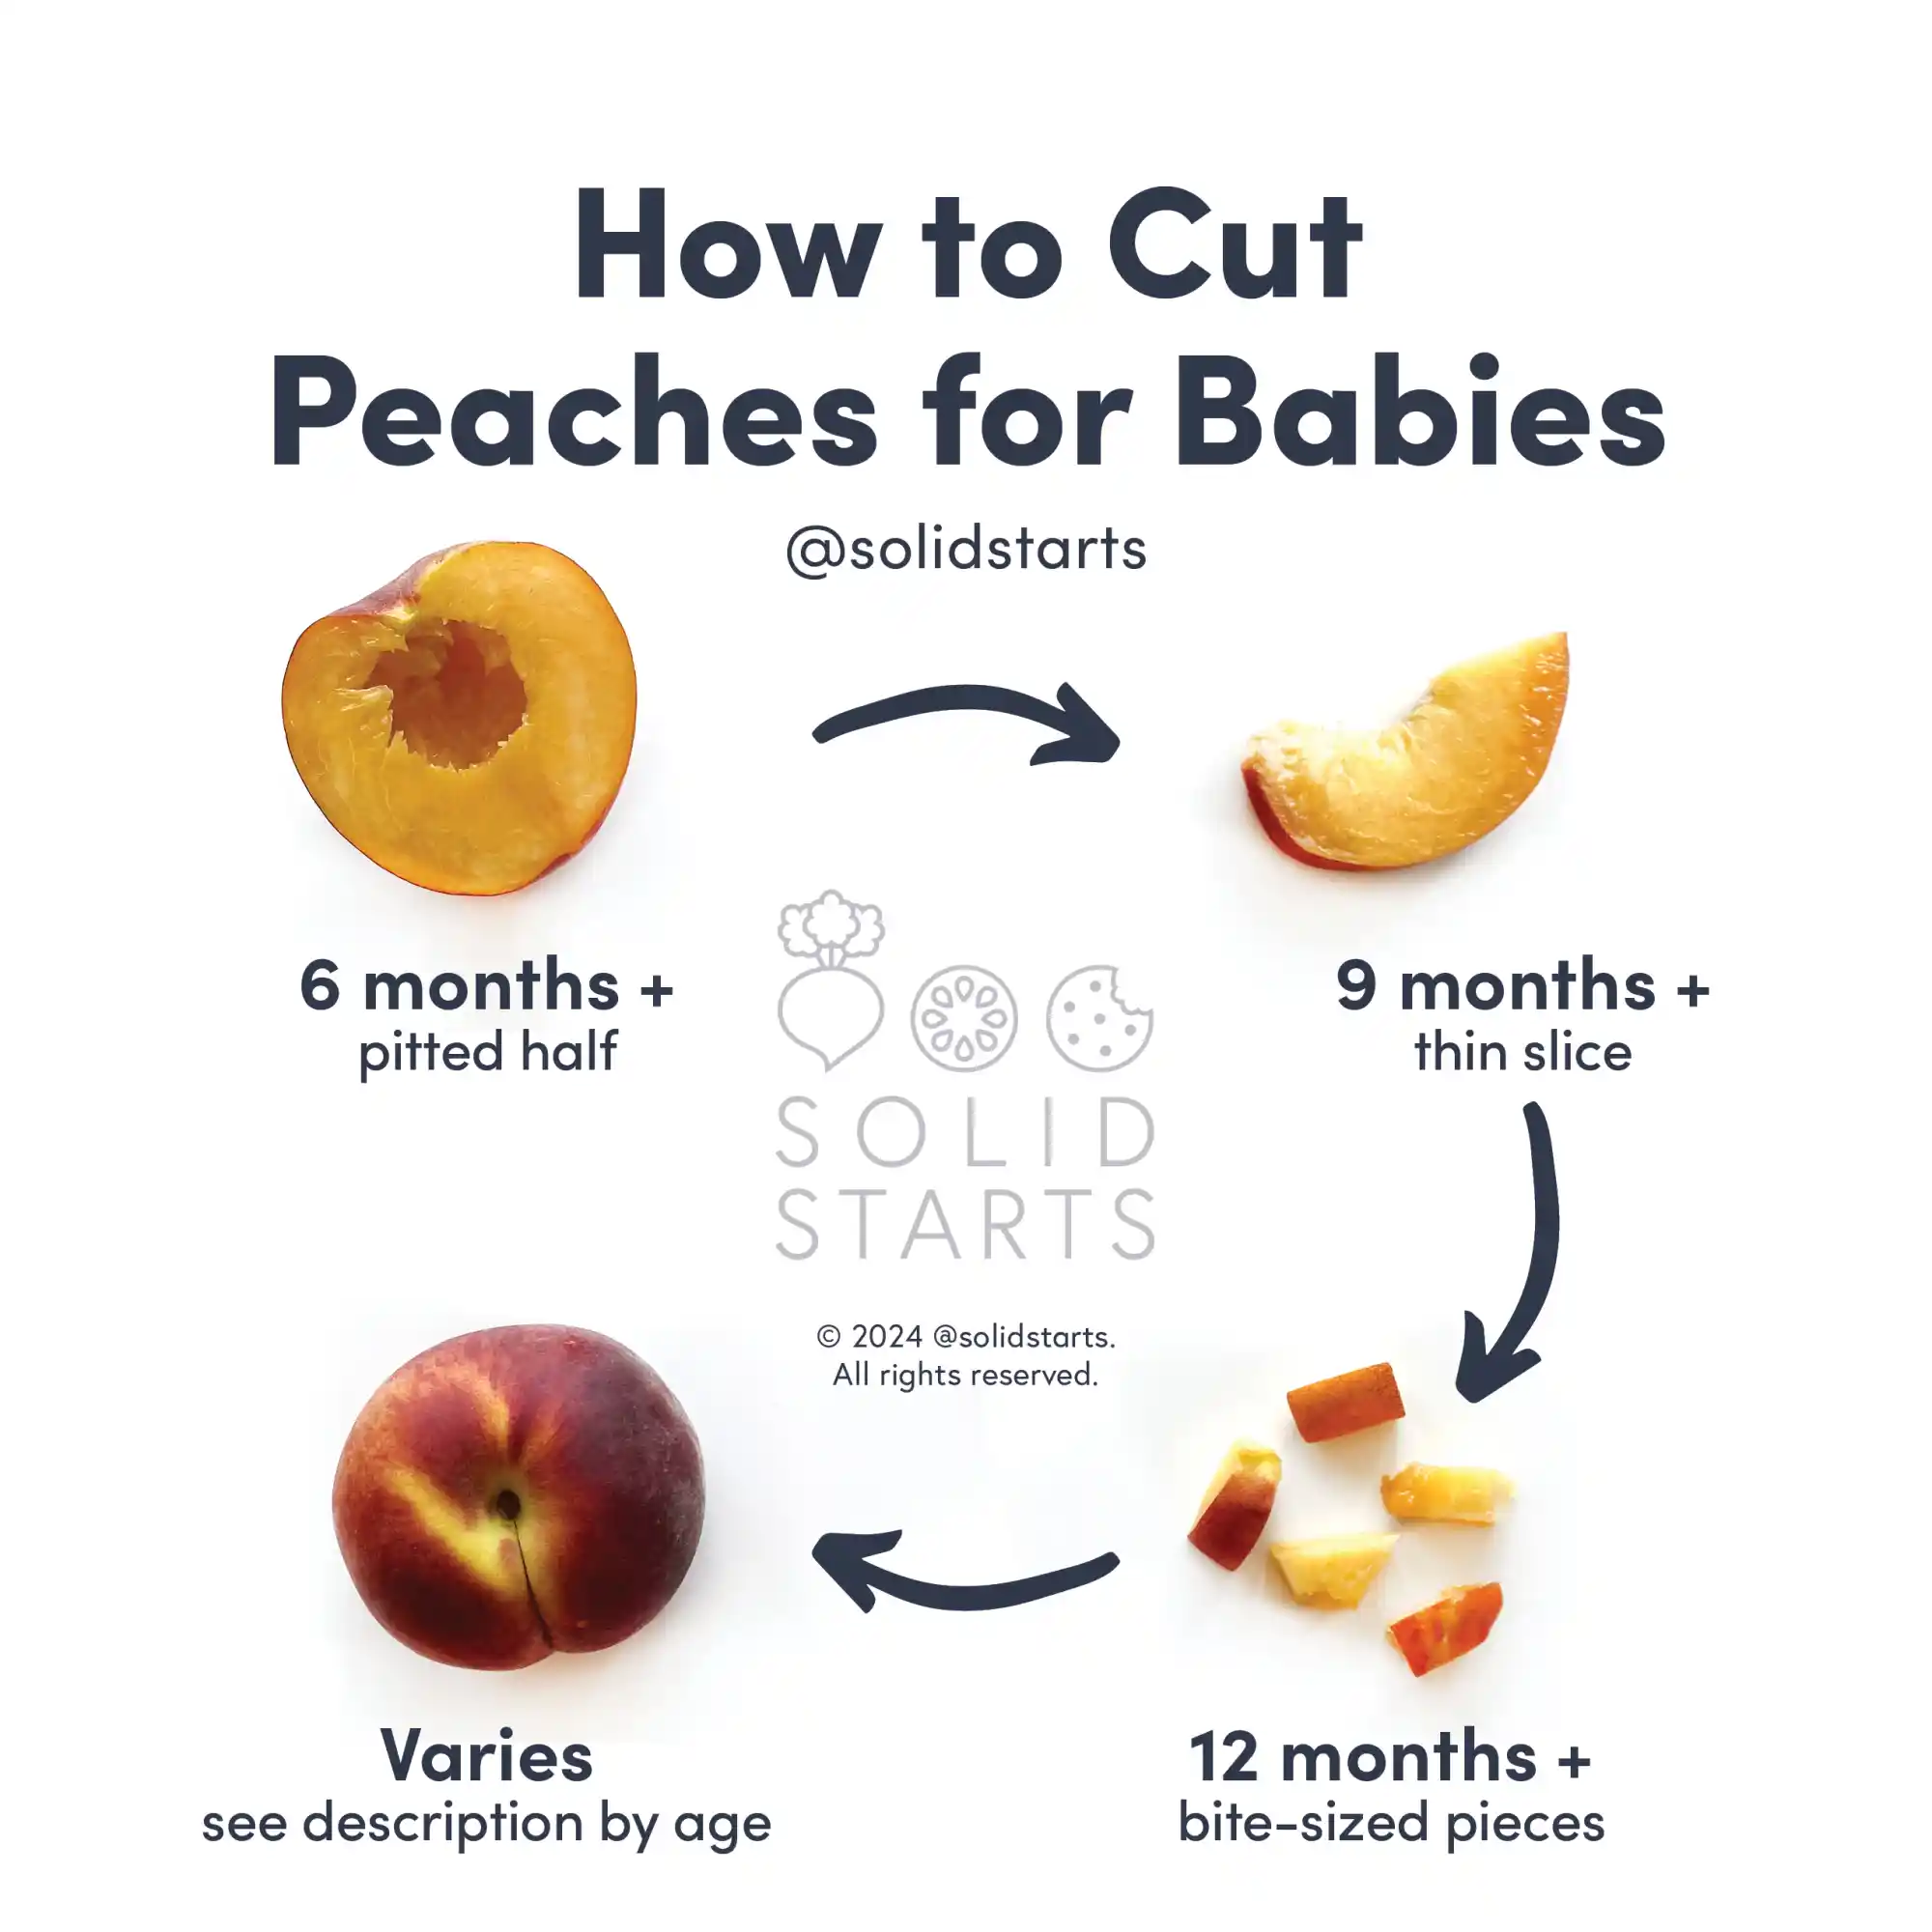 a Solid Starts infographic with the header How to Cut Peaches for Babies: a half, pitted peach for 6 months+, thin slices for 9 months+, bite size pieces for 12 months+, and a whole ripe peach for 18 months+